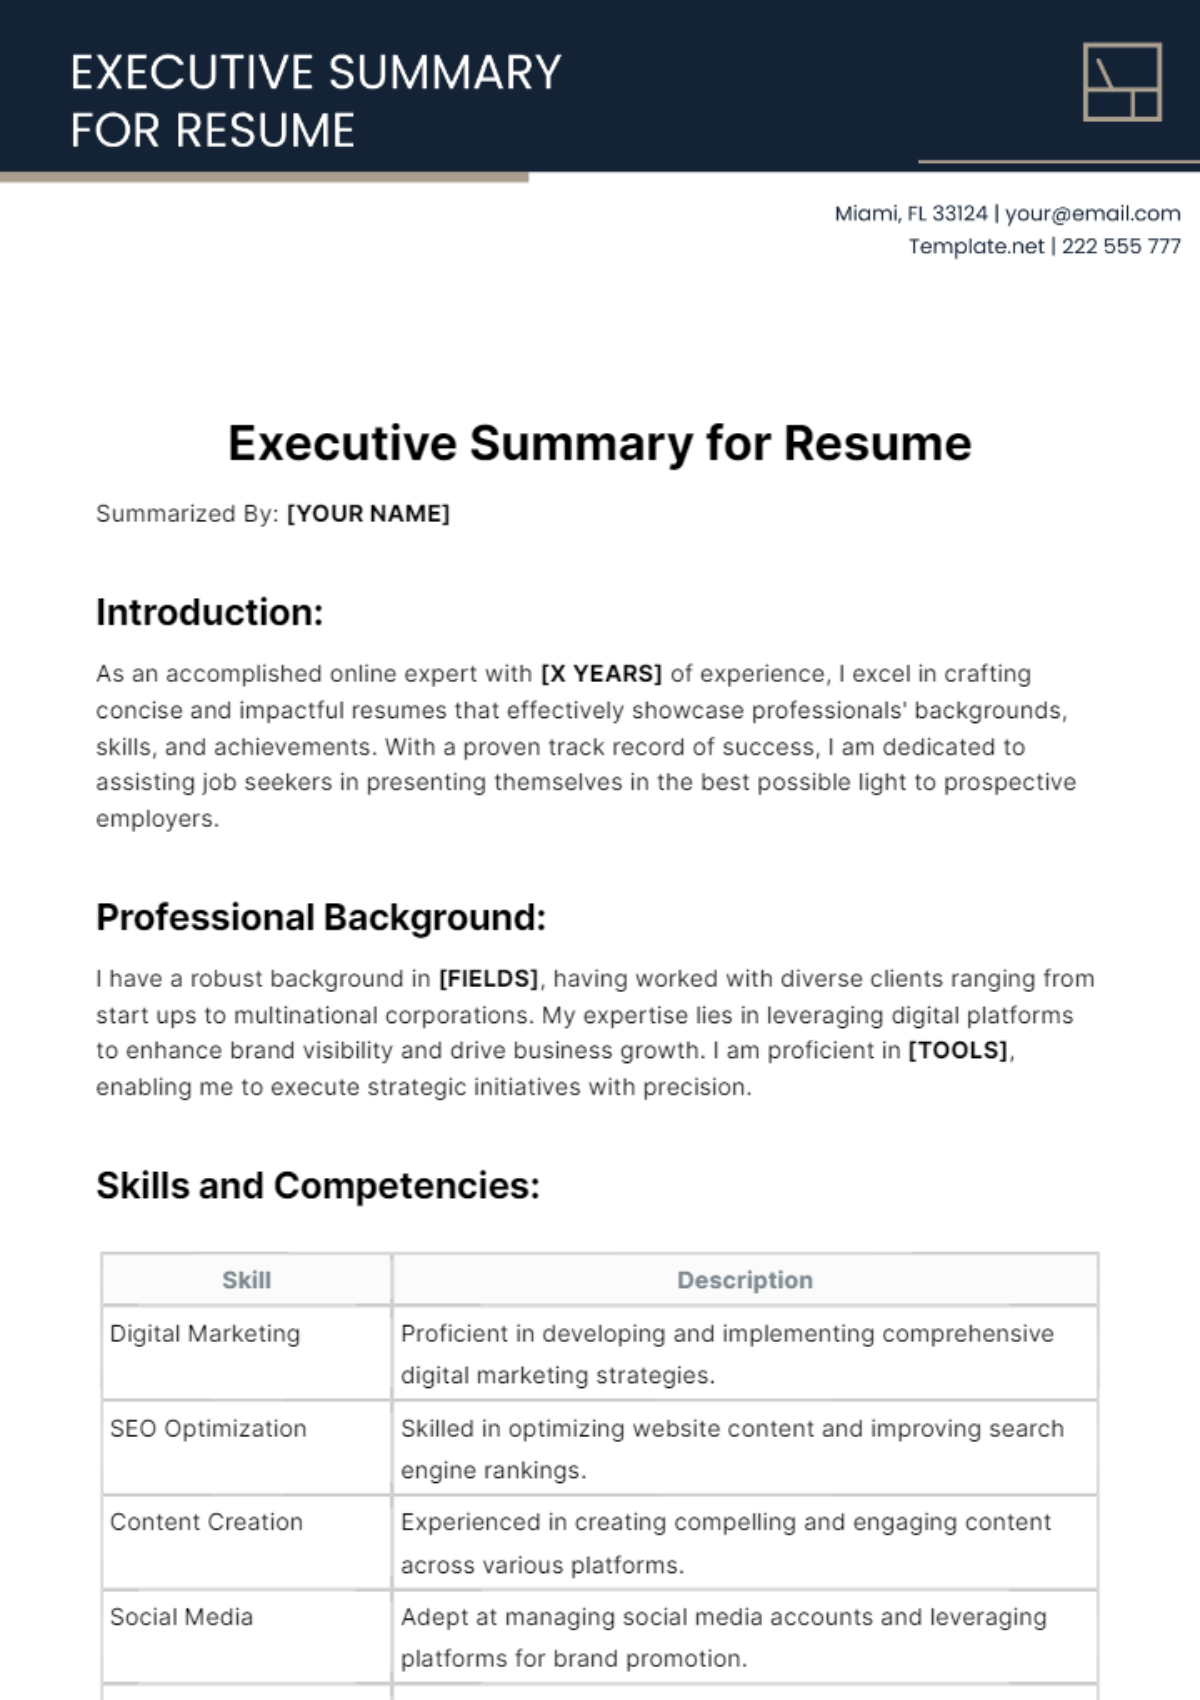 Executive Summary for Resume Template